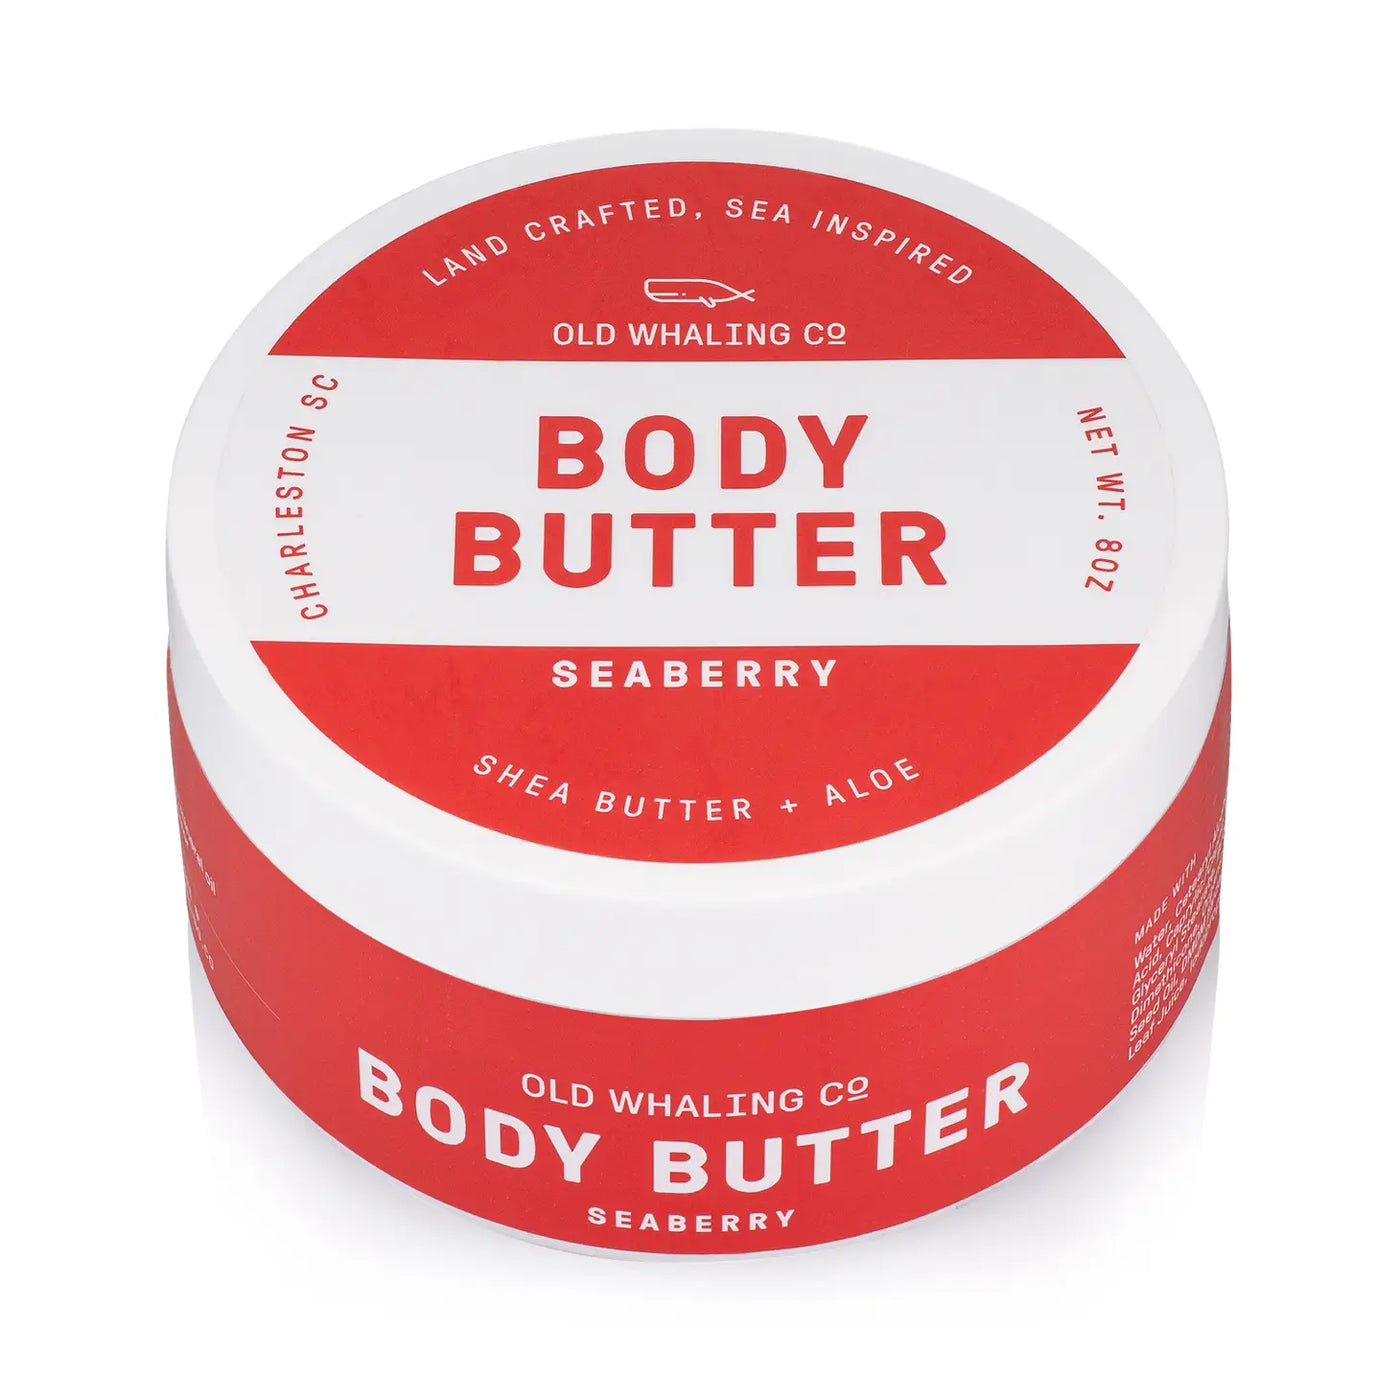 8oz Body Butter Seaberry